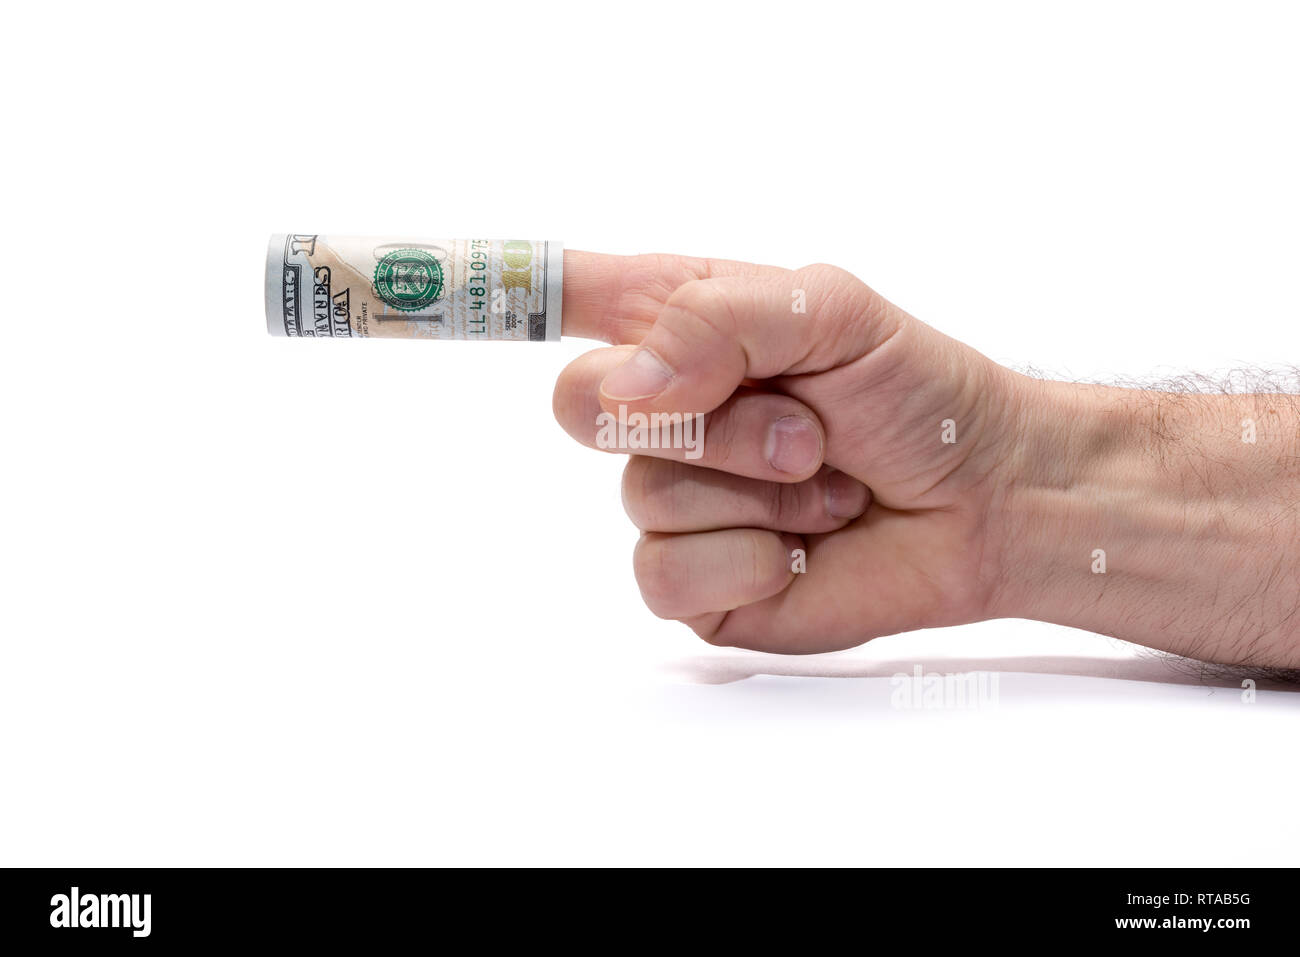 Conceptual image of don't or accepting bribes. Hand pointing left, a hundred dollar banknote wrapped around his finger. Are you offered a bribe? Stock Photo